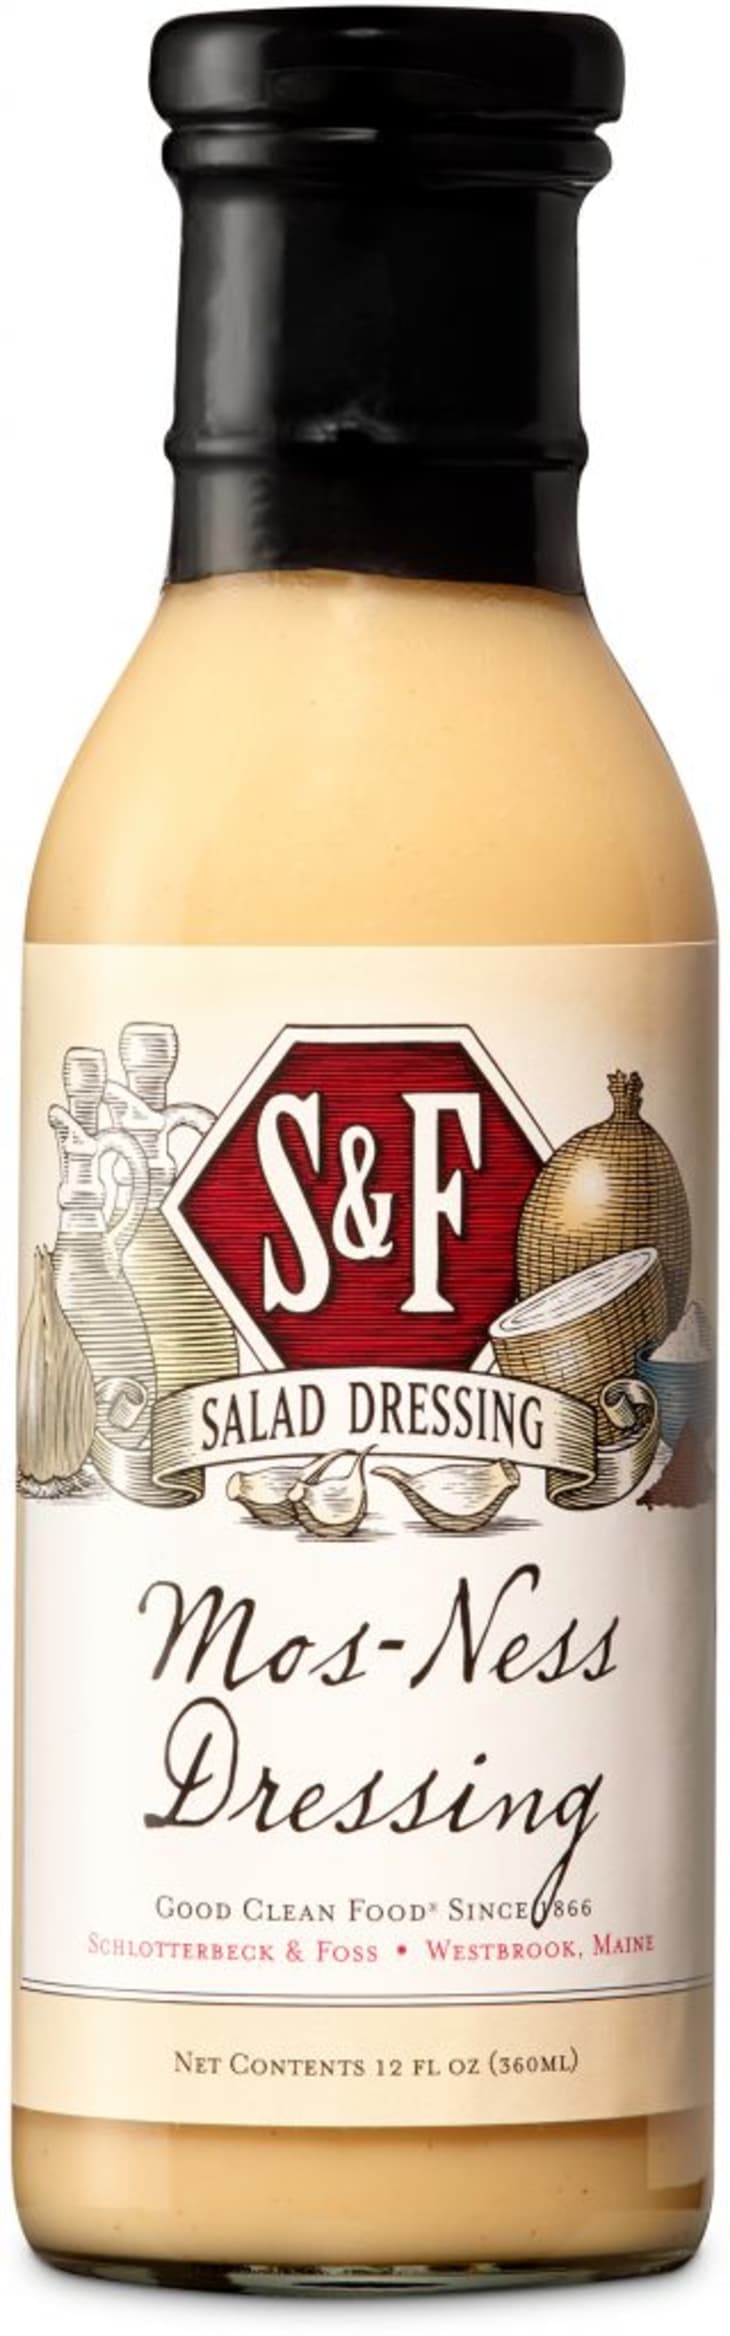 Mos-Ness French Dressing, 6-Pack at Schlotterbeck & Foss